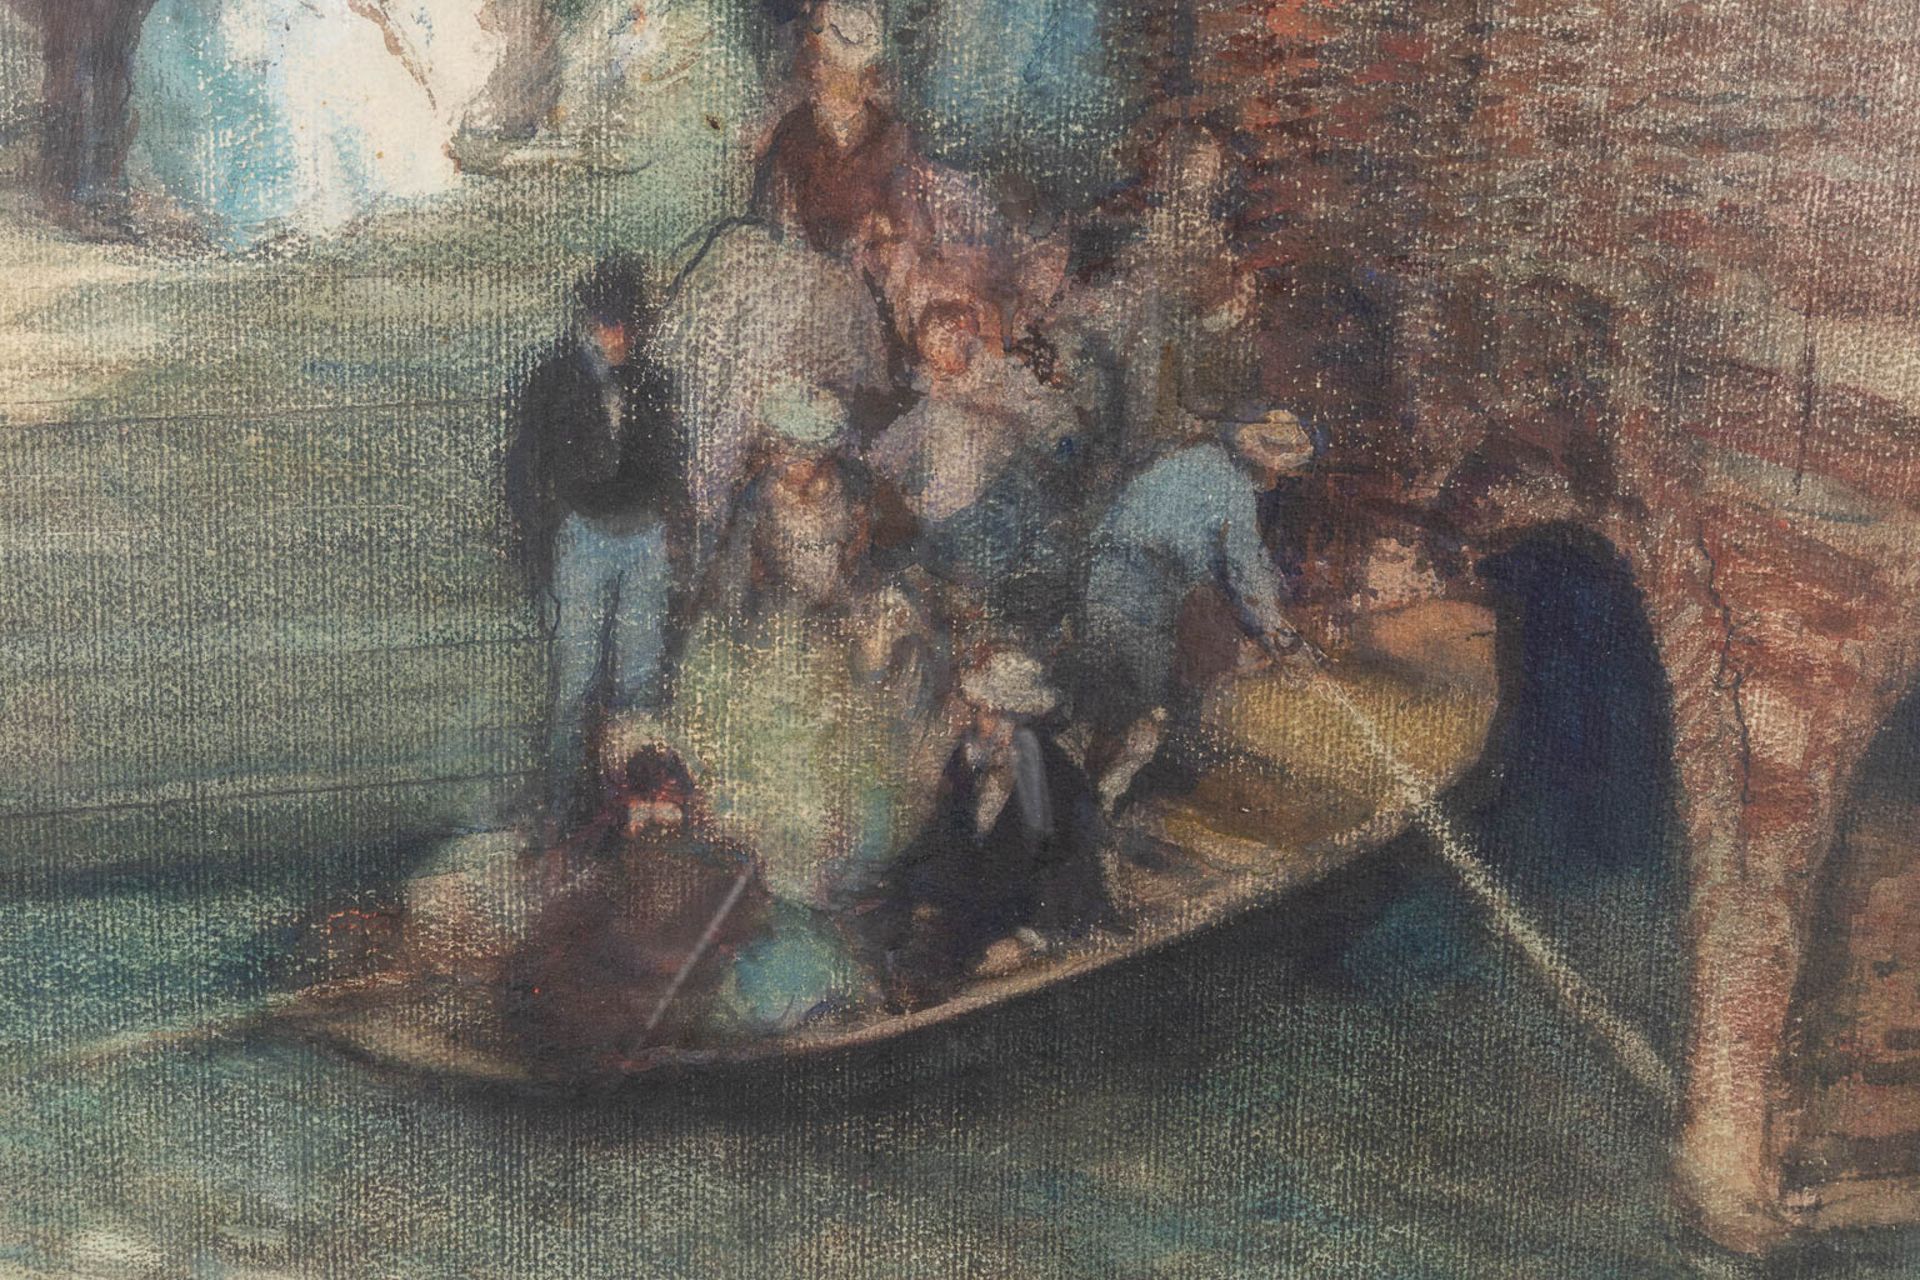 Fernand TOUSSAINT (1873-1955/56) 'Wedding boatride' mixed media on board. (W: 80 x H: 65 cm) - Image 5 of 7